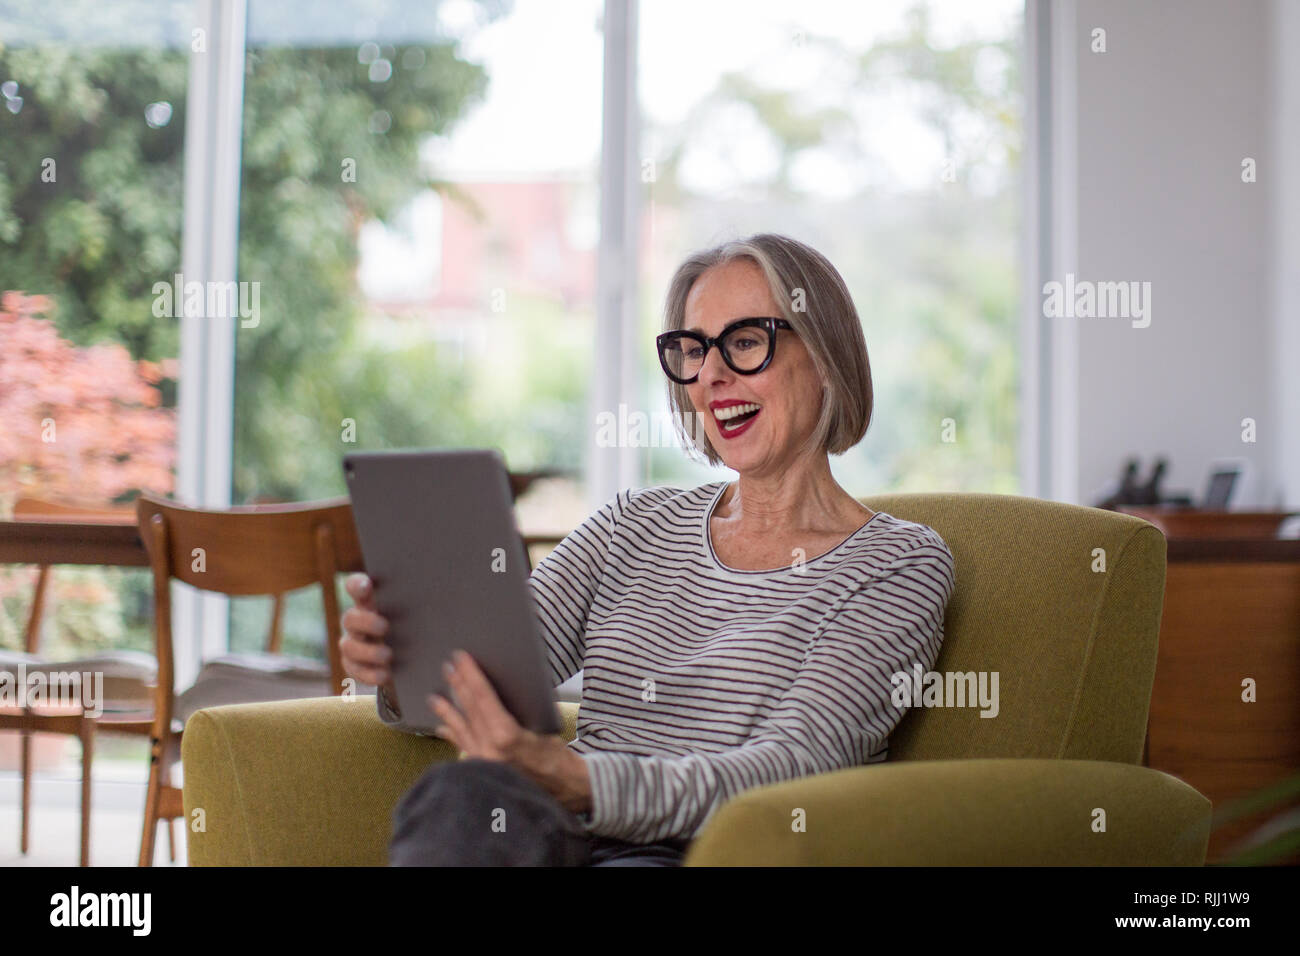 Mature adult female on a videocall to family Stock Photo